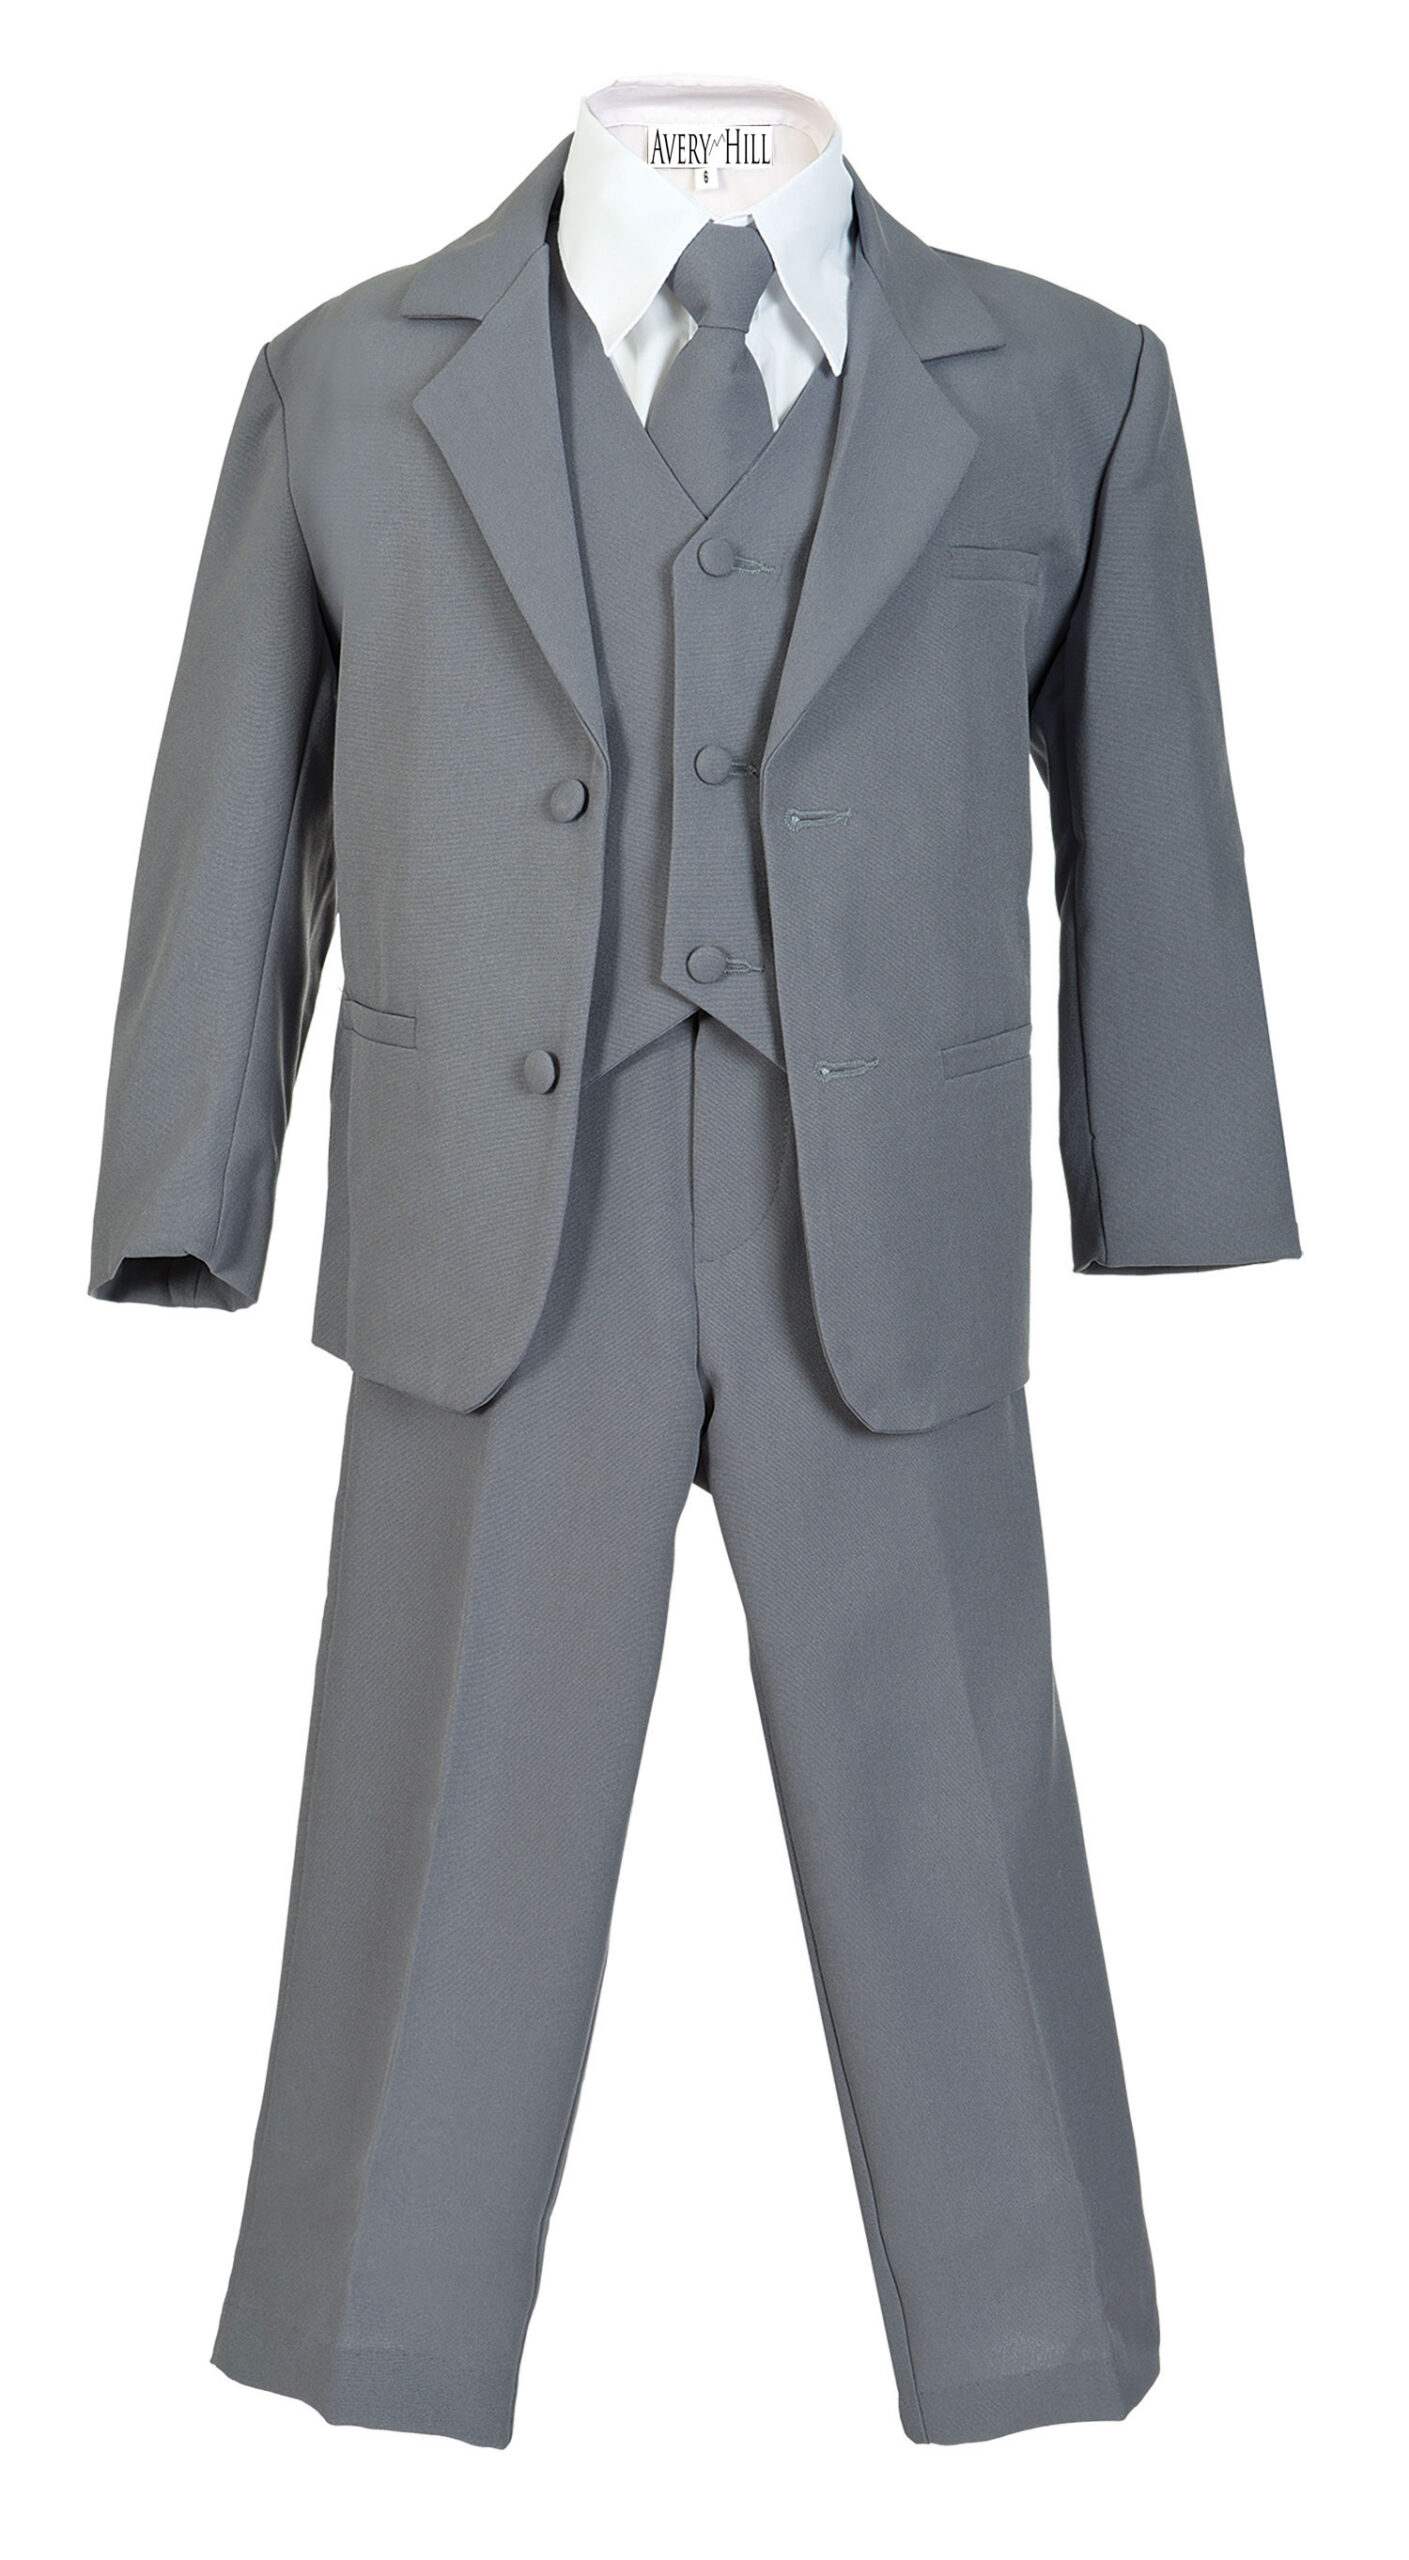 Avery Hill Boys Formal 5 Piece Suit with Shirt and Vest Slate Gray - L